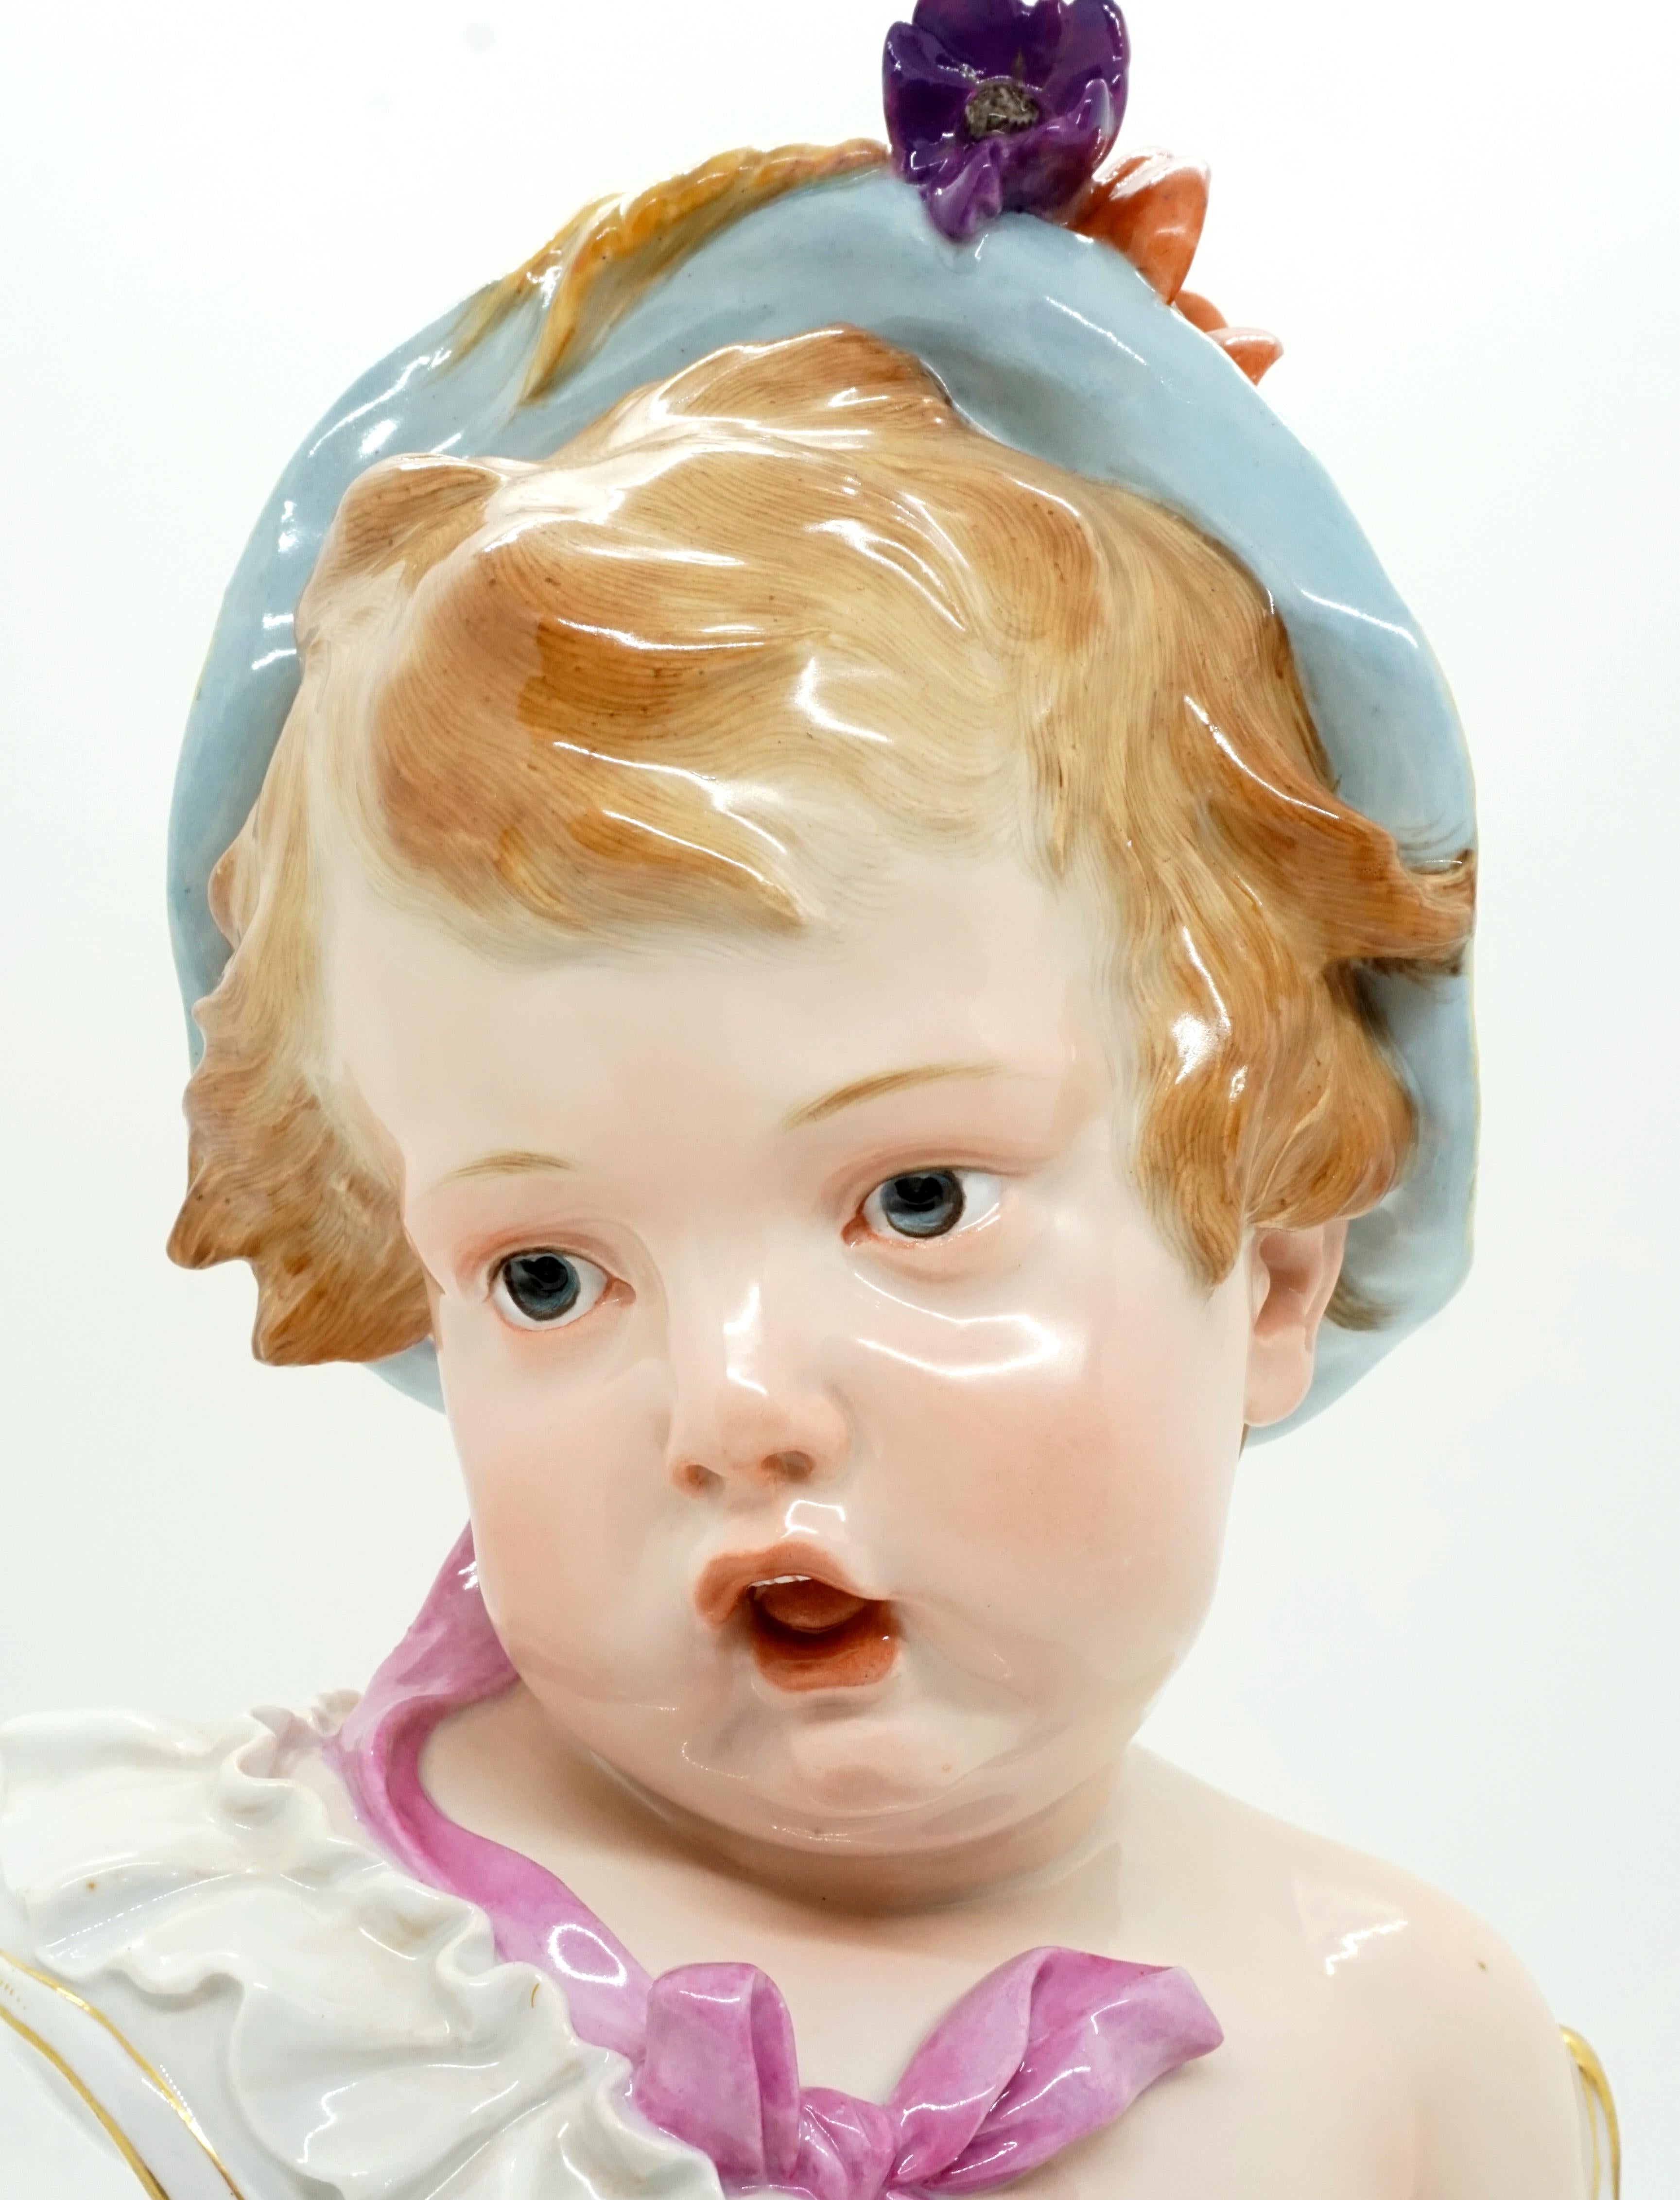 Hand-Crafted Meissen Child Bust 'Summer' from Series of The 4 Seasons by H. Schwabe